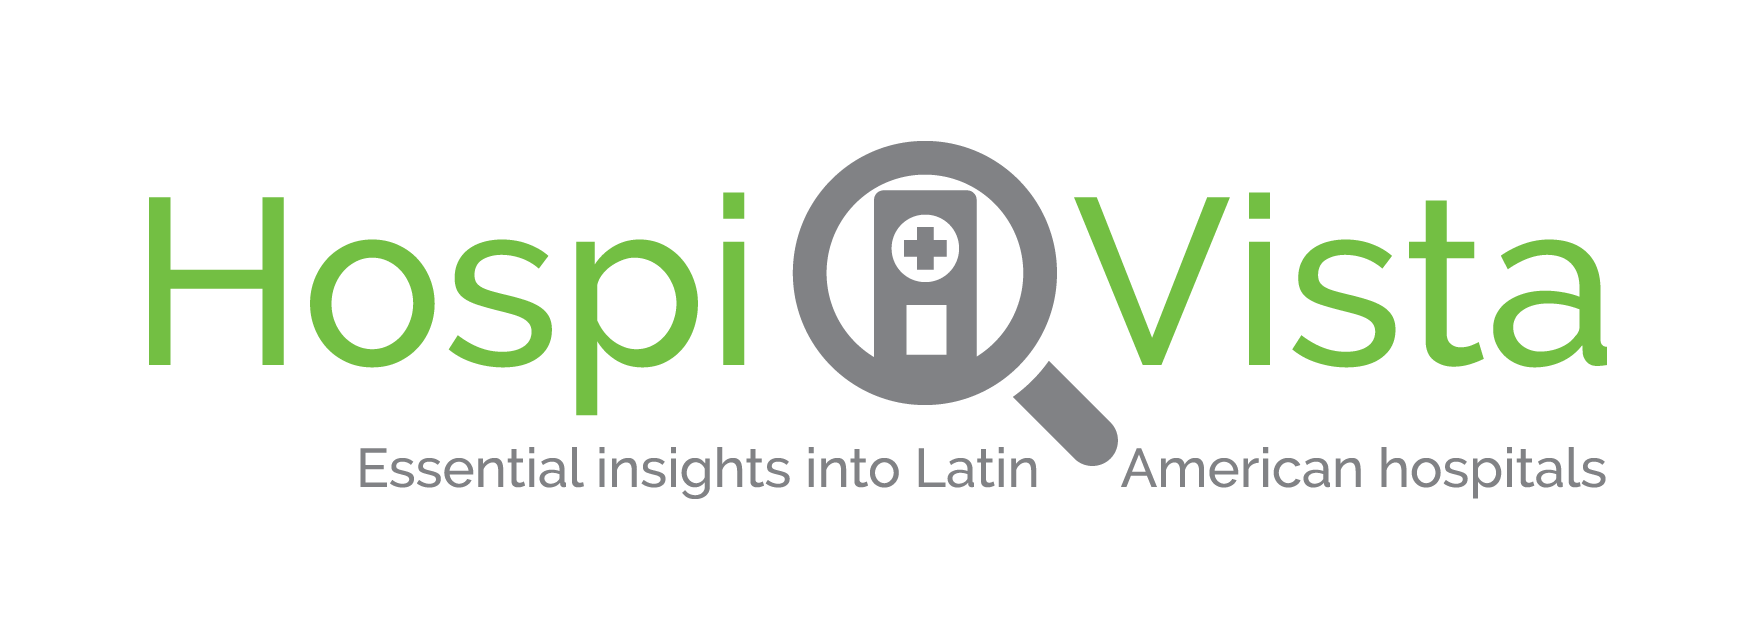 Essential insights into Latin American hospitals